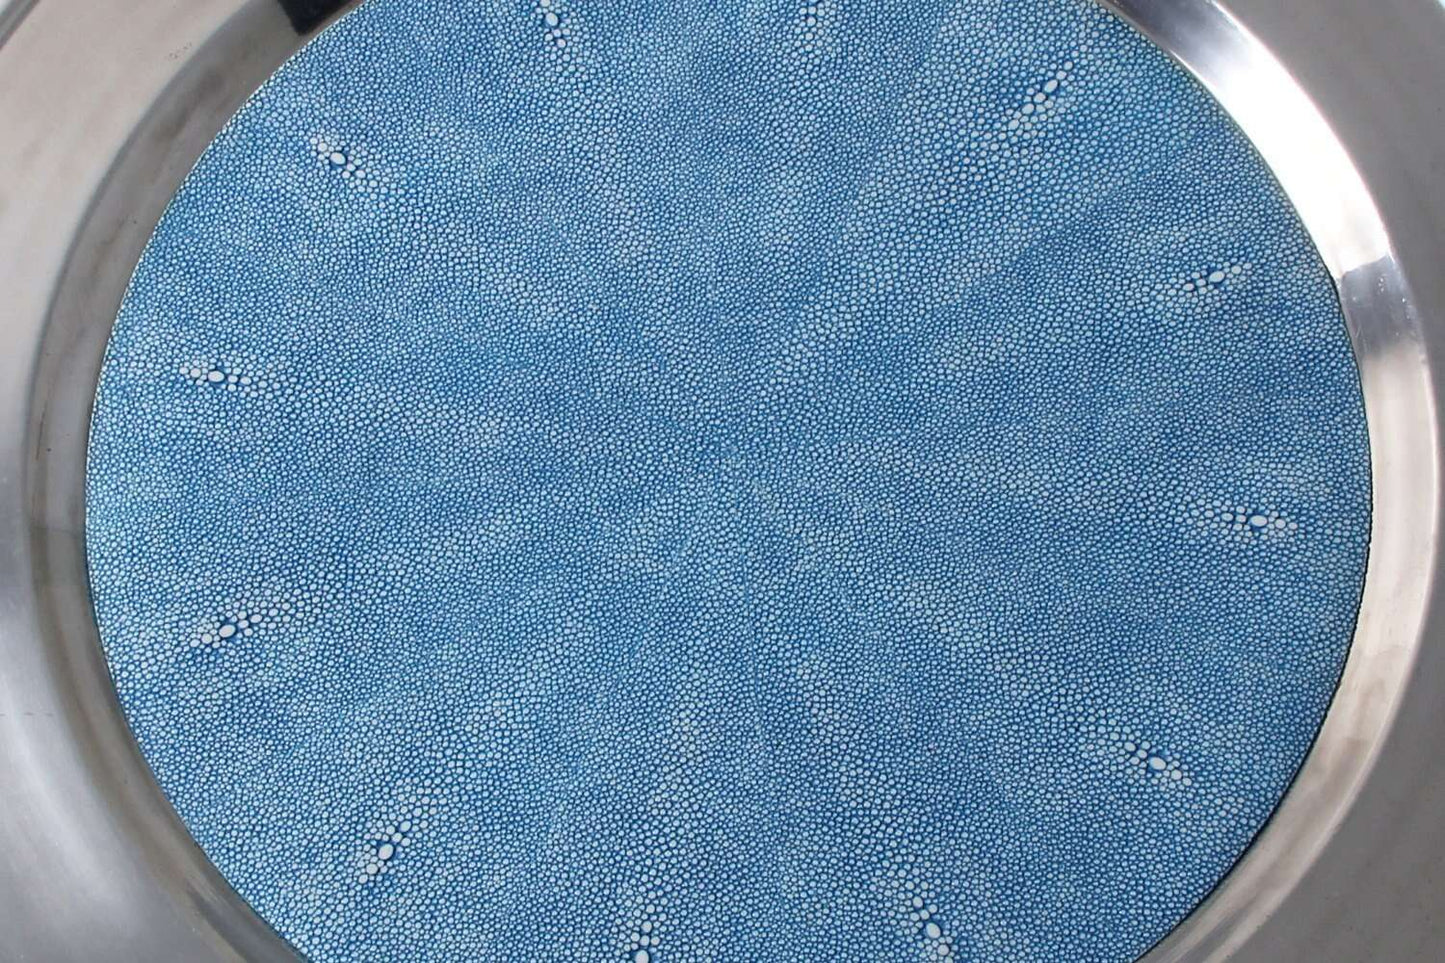 Duchess Serving Tray in Bahama Blue